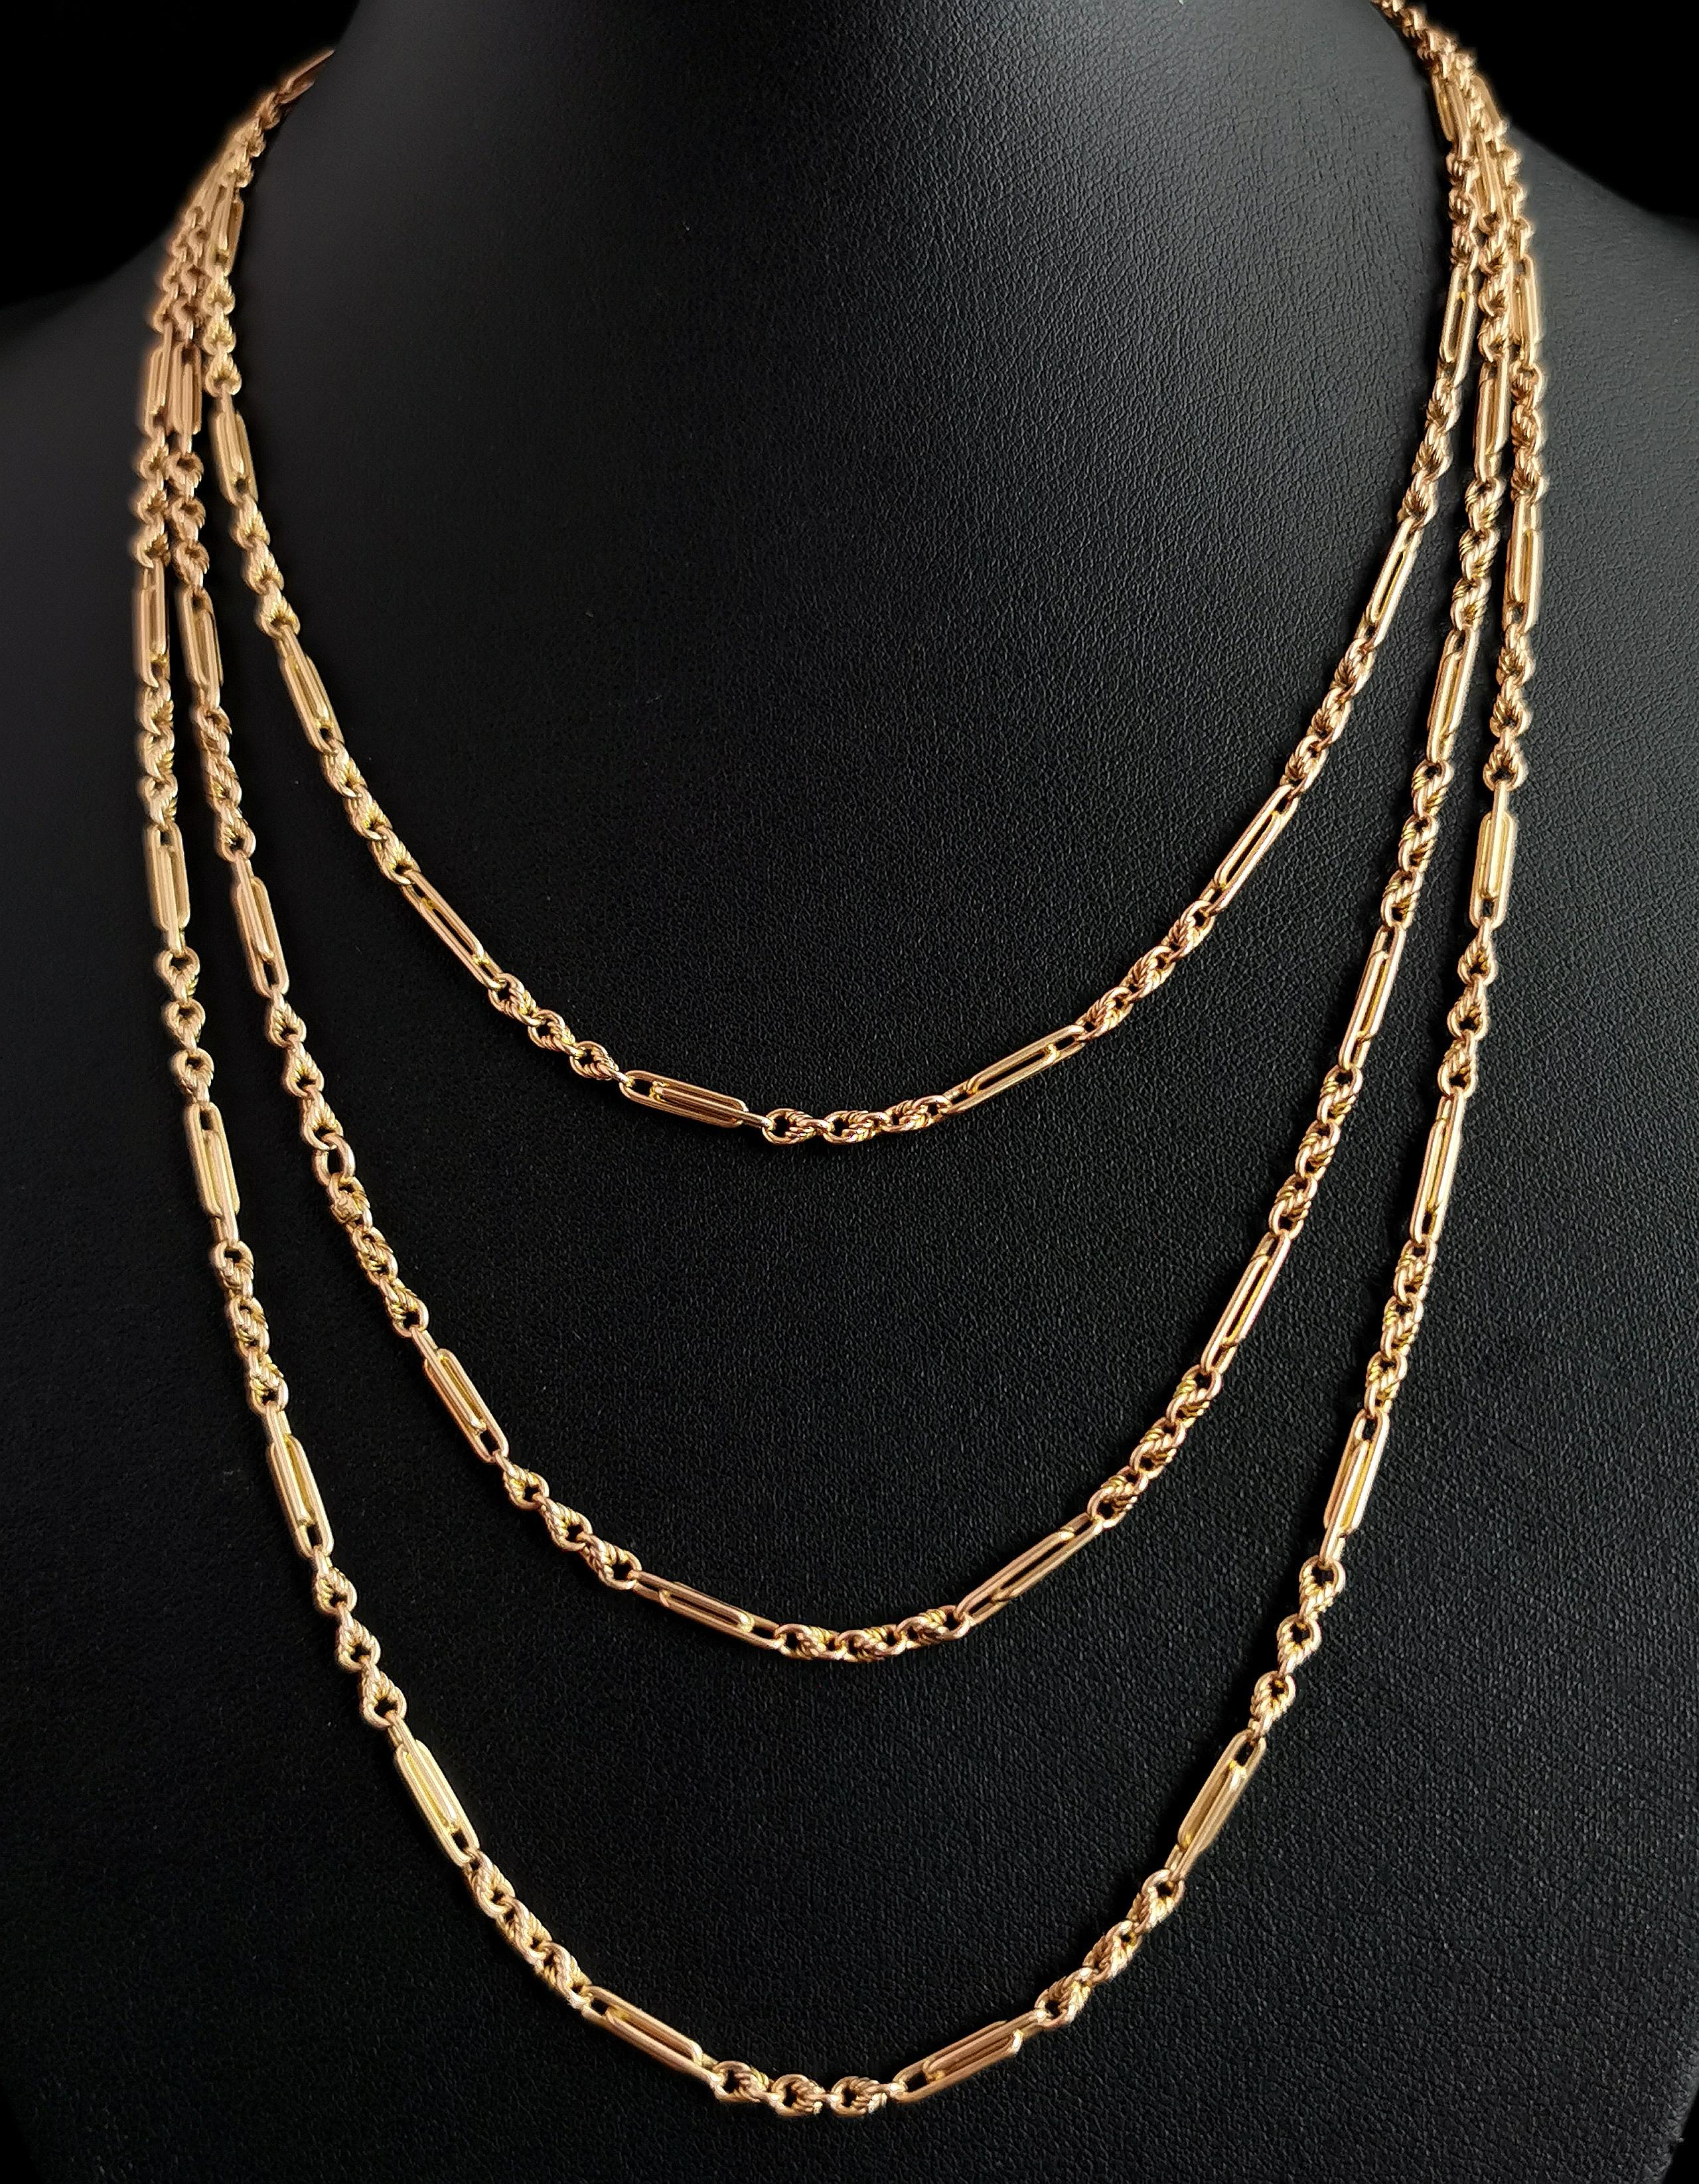 An impeccable antique, late Victorian era 15kt gold longuard chain necklace.

The lush, rich 15kt gold is warm and and inviting with a hue that is highly sought after in addition to the well designed paperclip and knot links and will make a